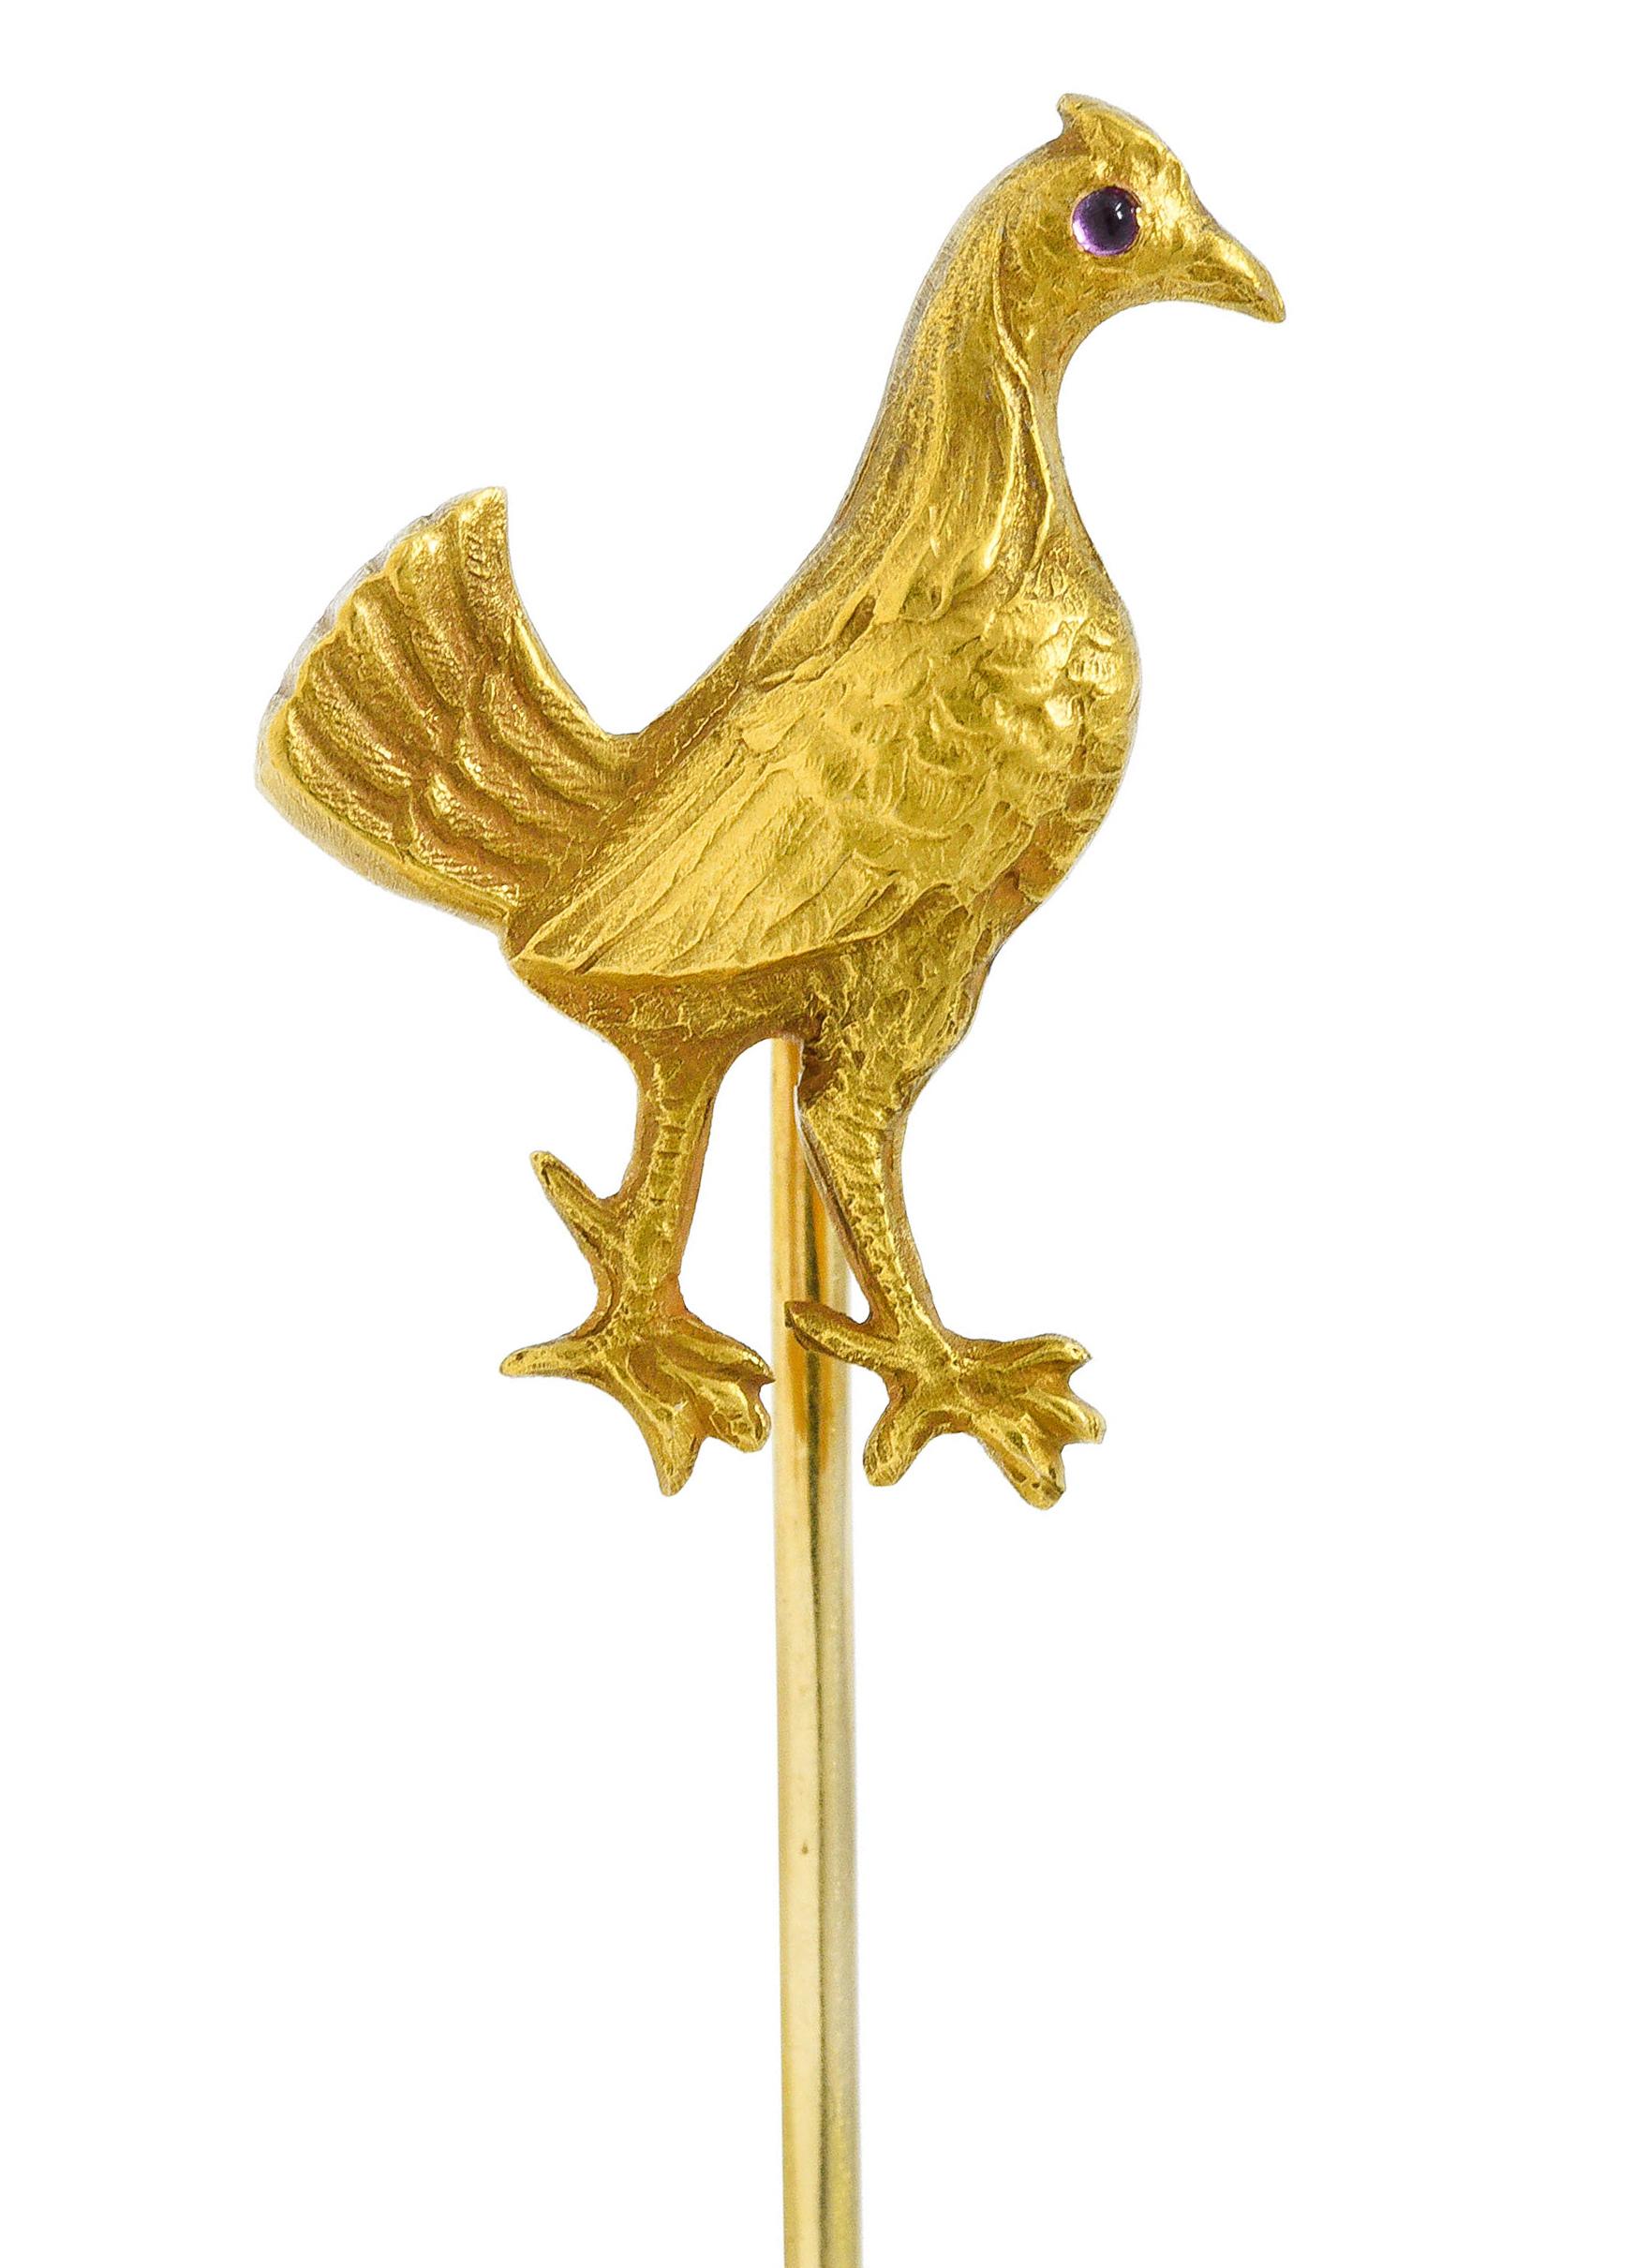 Designed as a strutting quail with a fanned tail and ruby cabochon eye

Feathers are highly rendered and feature a matte finish

Stamped 14K for 14 karat gold

Circa: 1905

Quail measures: 5/8 x 13/16 inch

Total length: 2 11/16 inches

Total